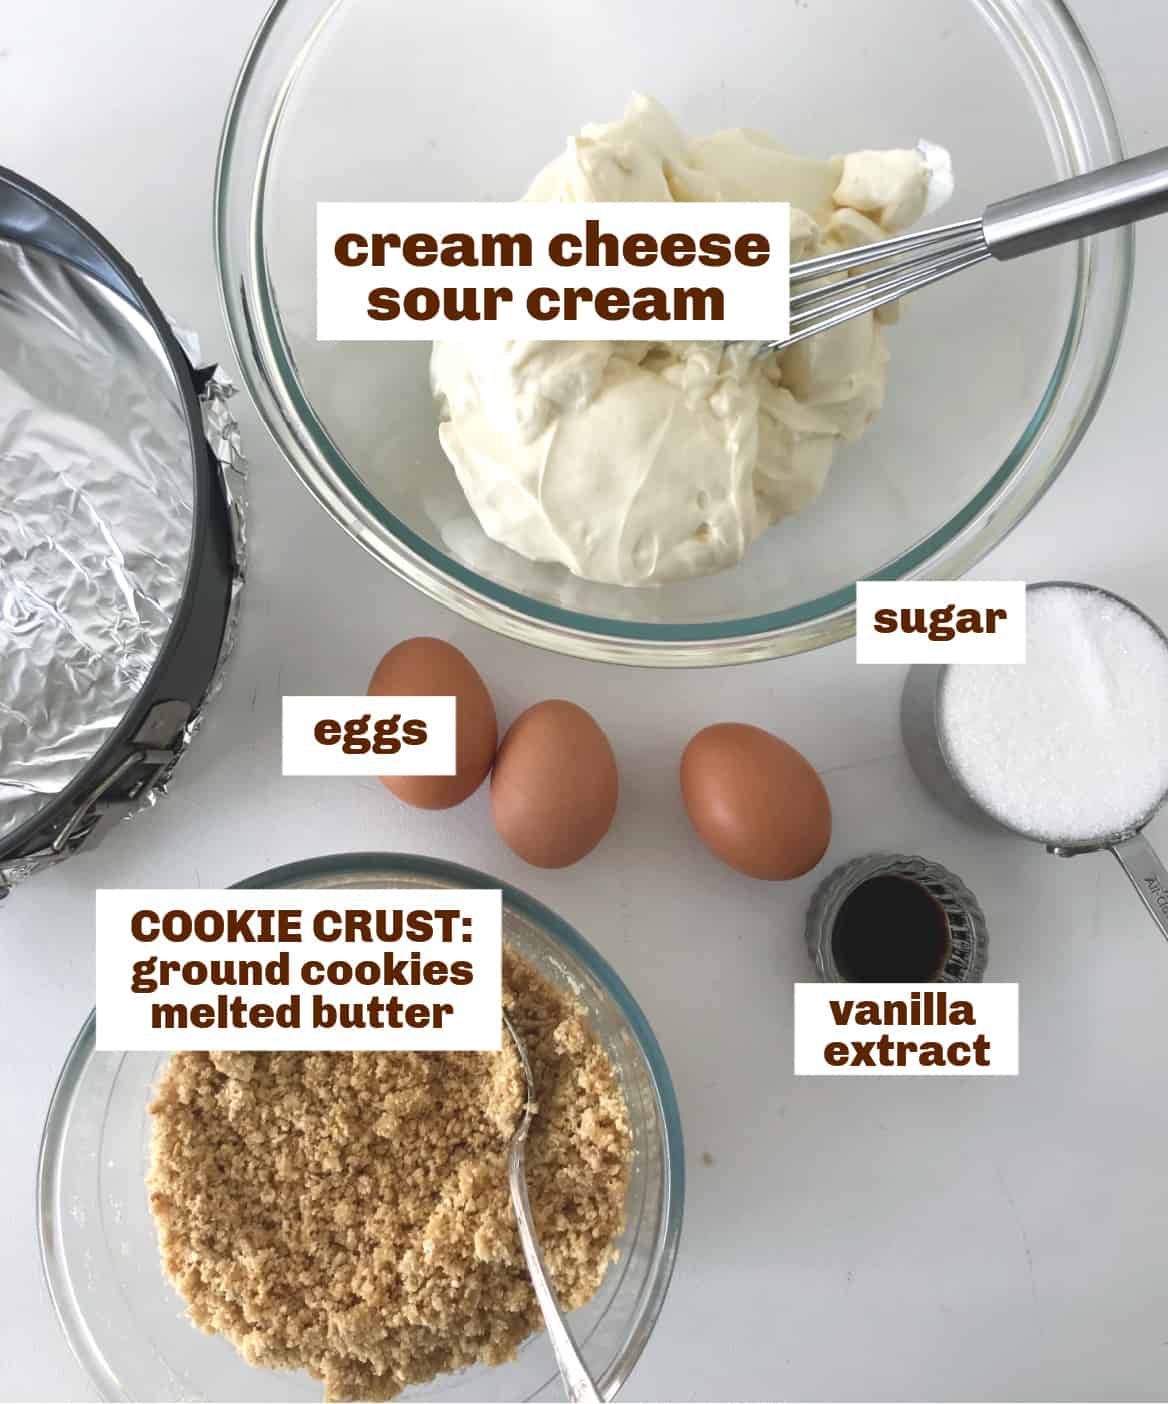 On a white surface bowls with ingredients, whole eggs, cake pan; image with text